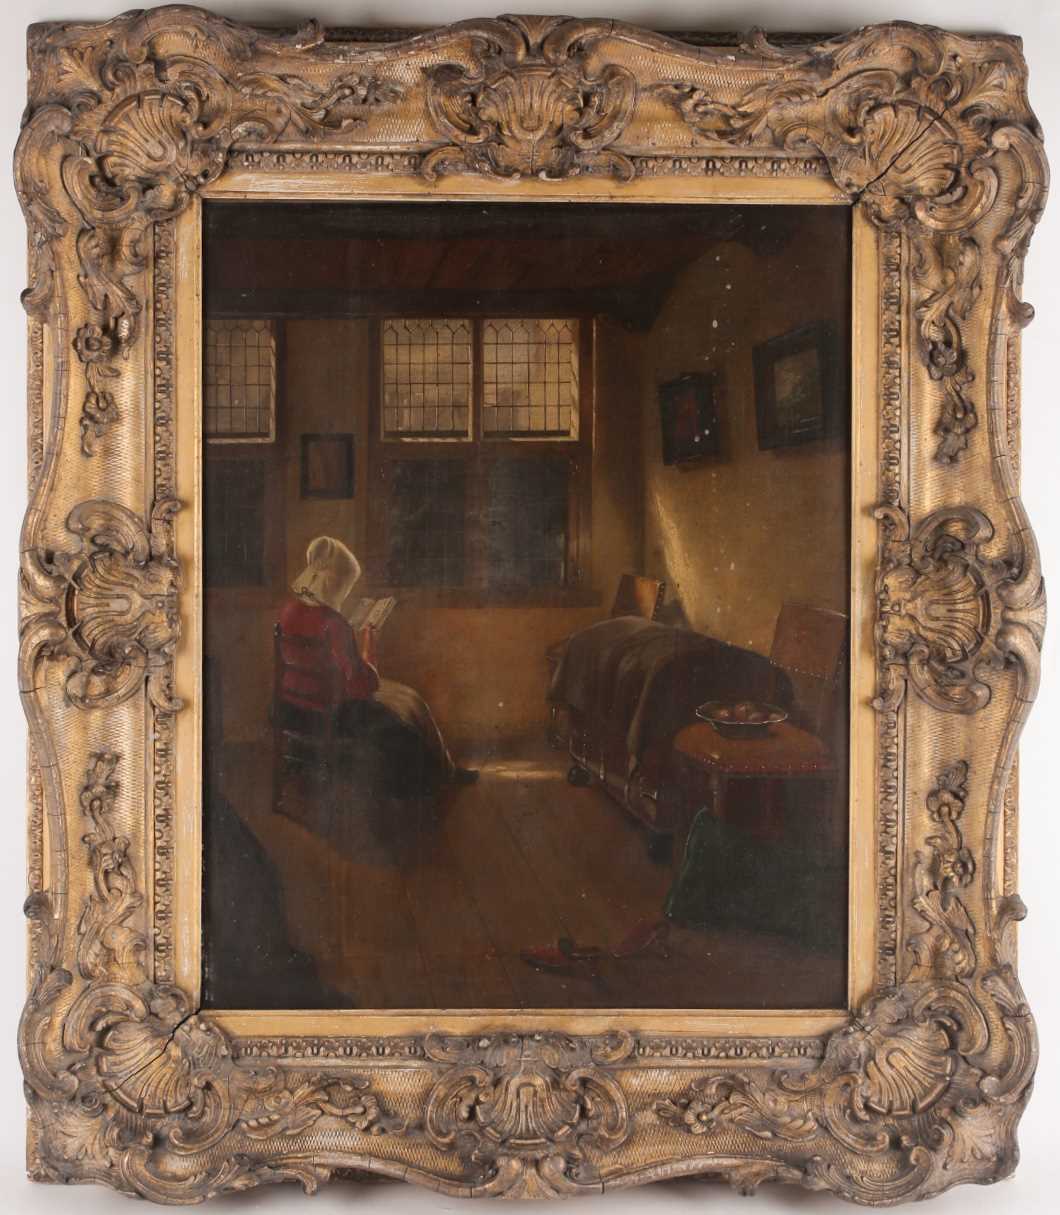 19th century Dutch school, a seated lady reading in an interior setting, oil on canvas, unsigned, 52